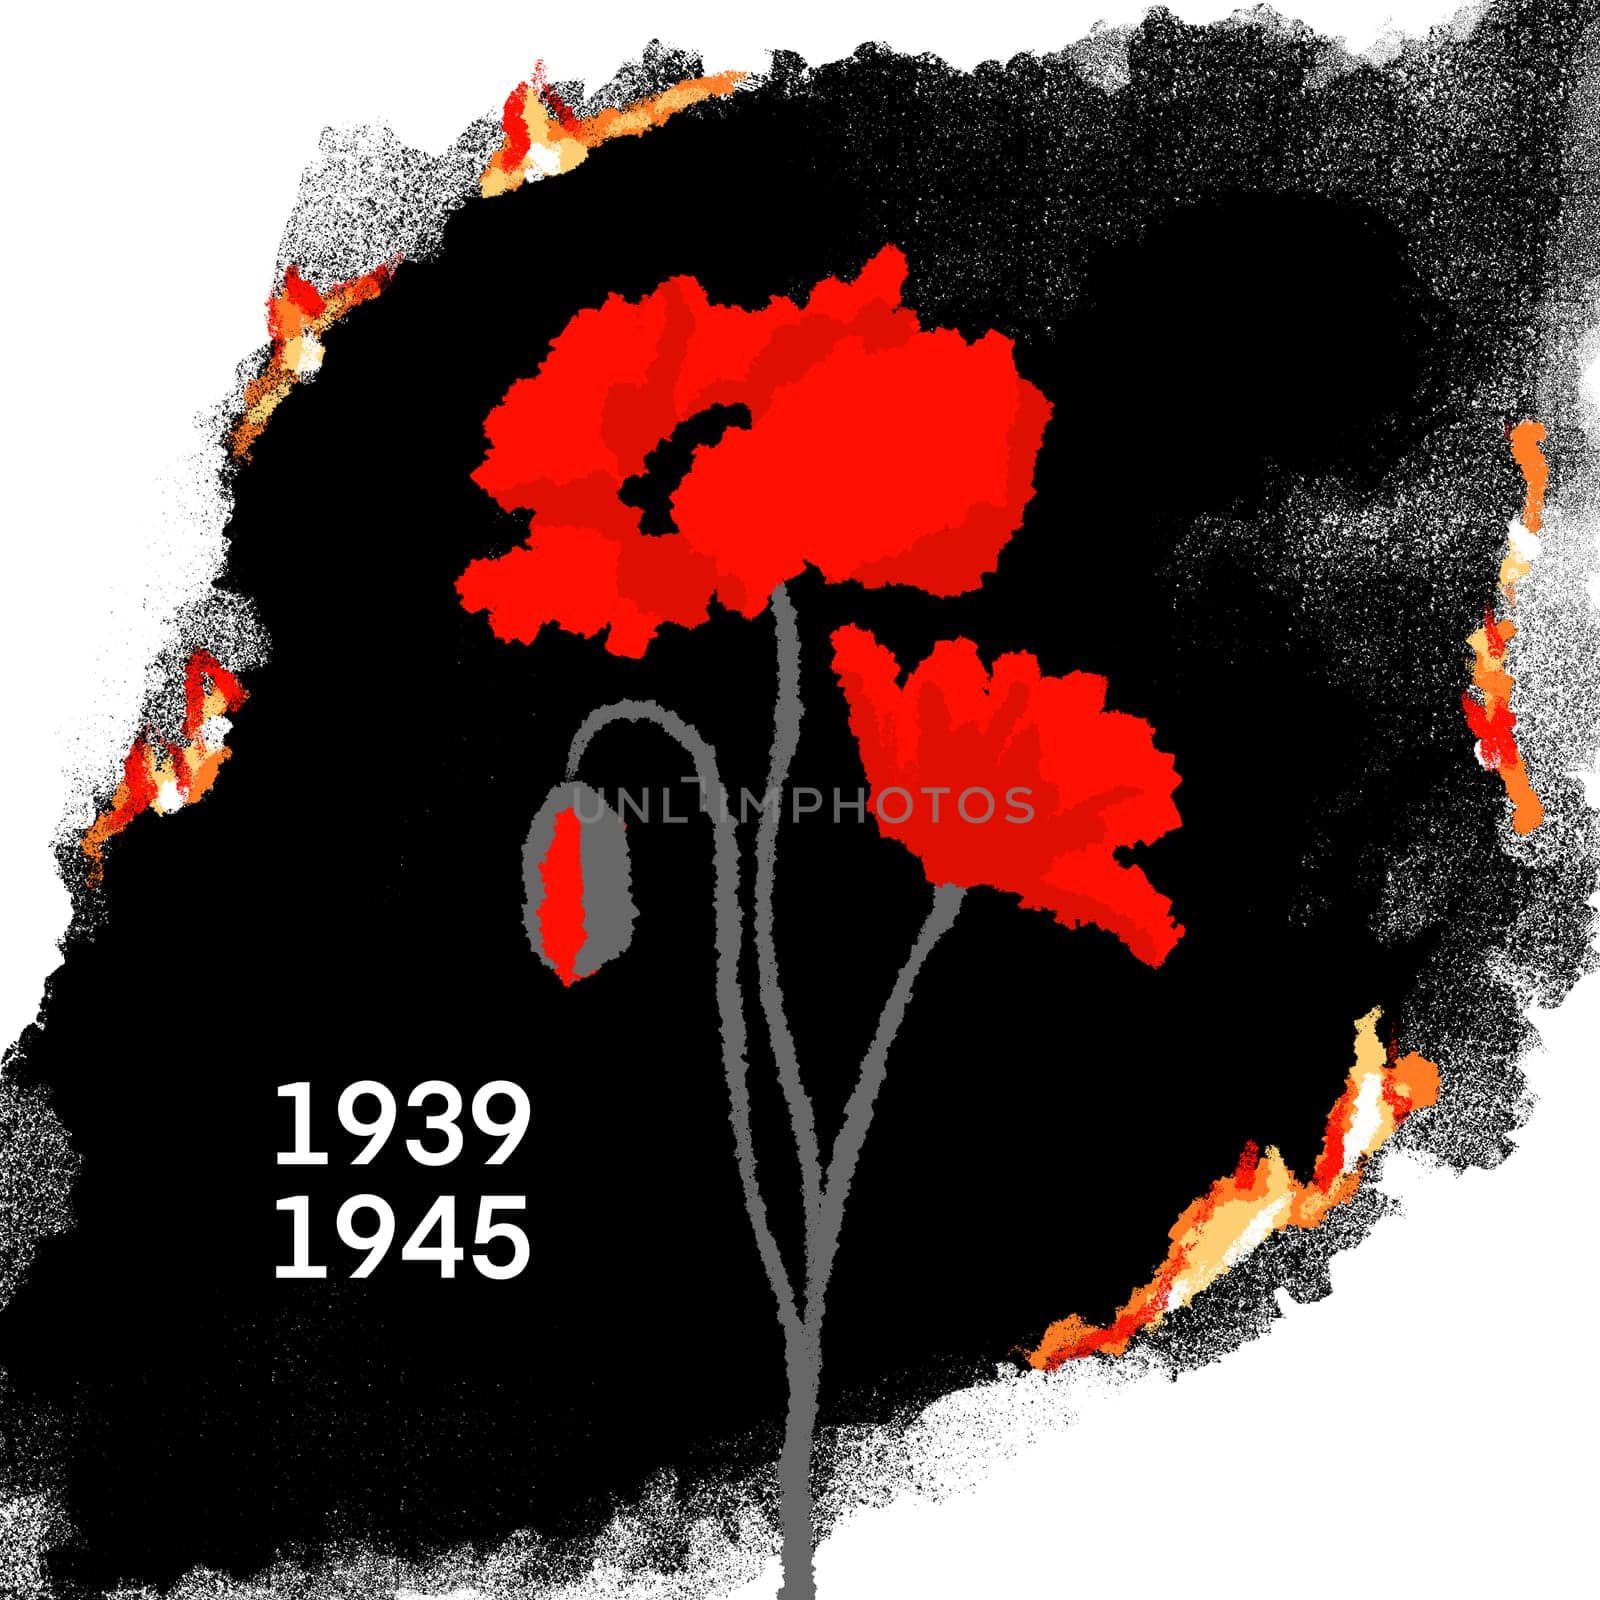 Hand drawn illustration of world war ii two second with red poppies, poppy flower 1939 1945 date. Fire burning paper concept, memorial commemoration poster, rememberance day military symbol history victory design